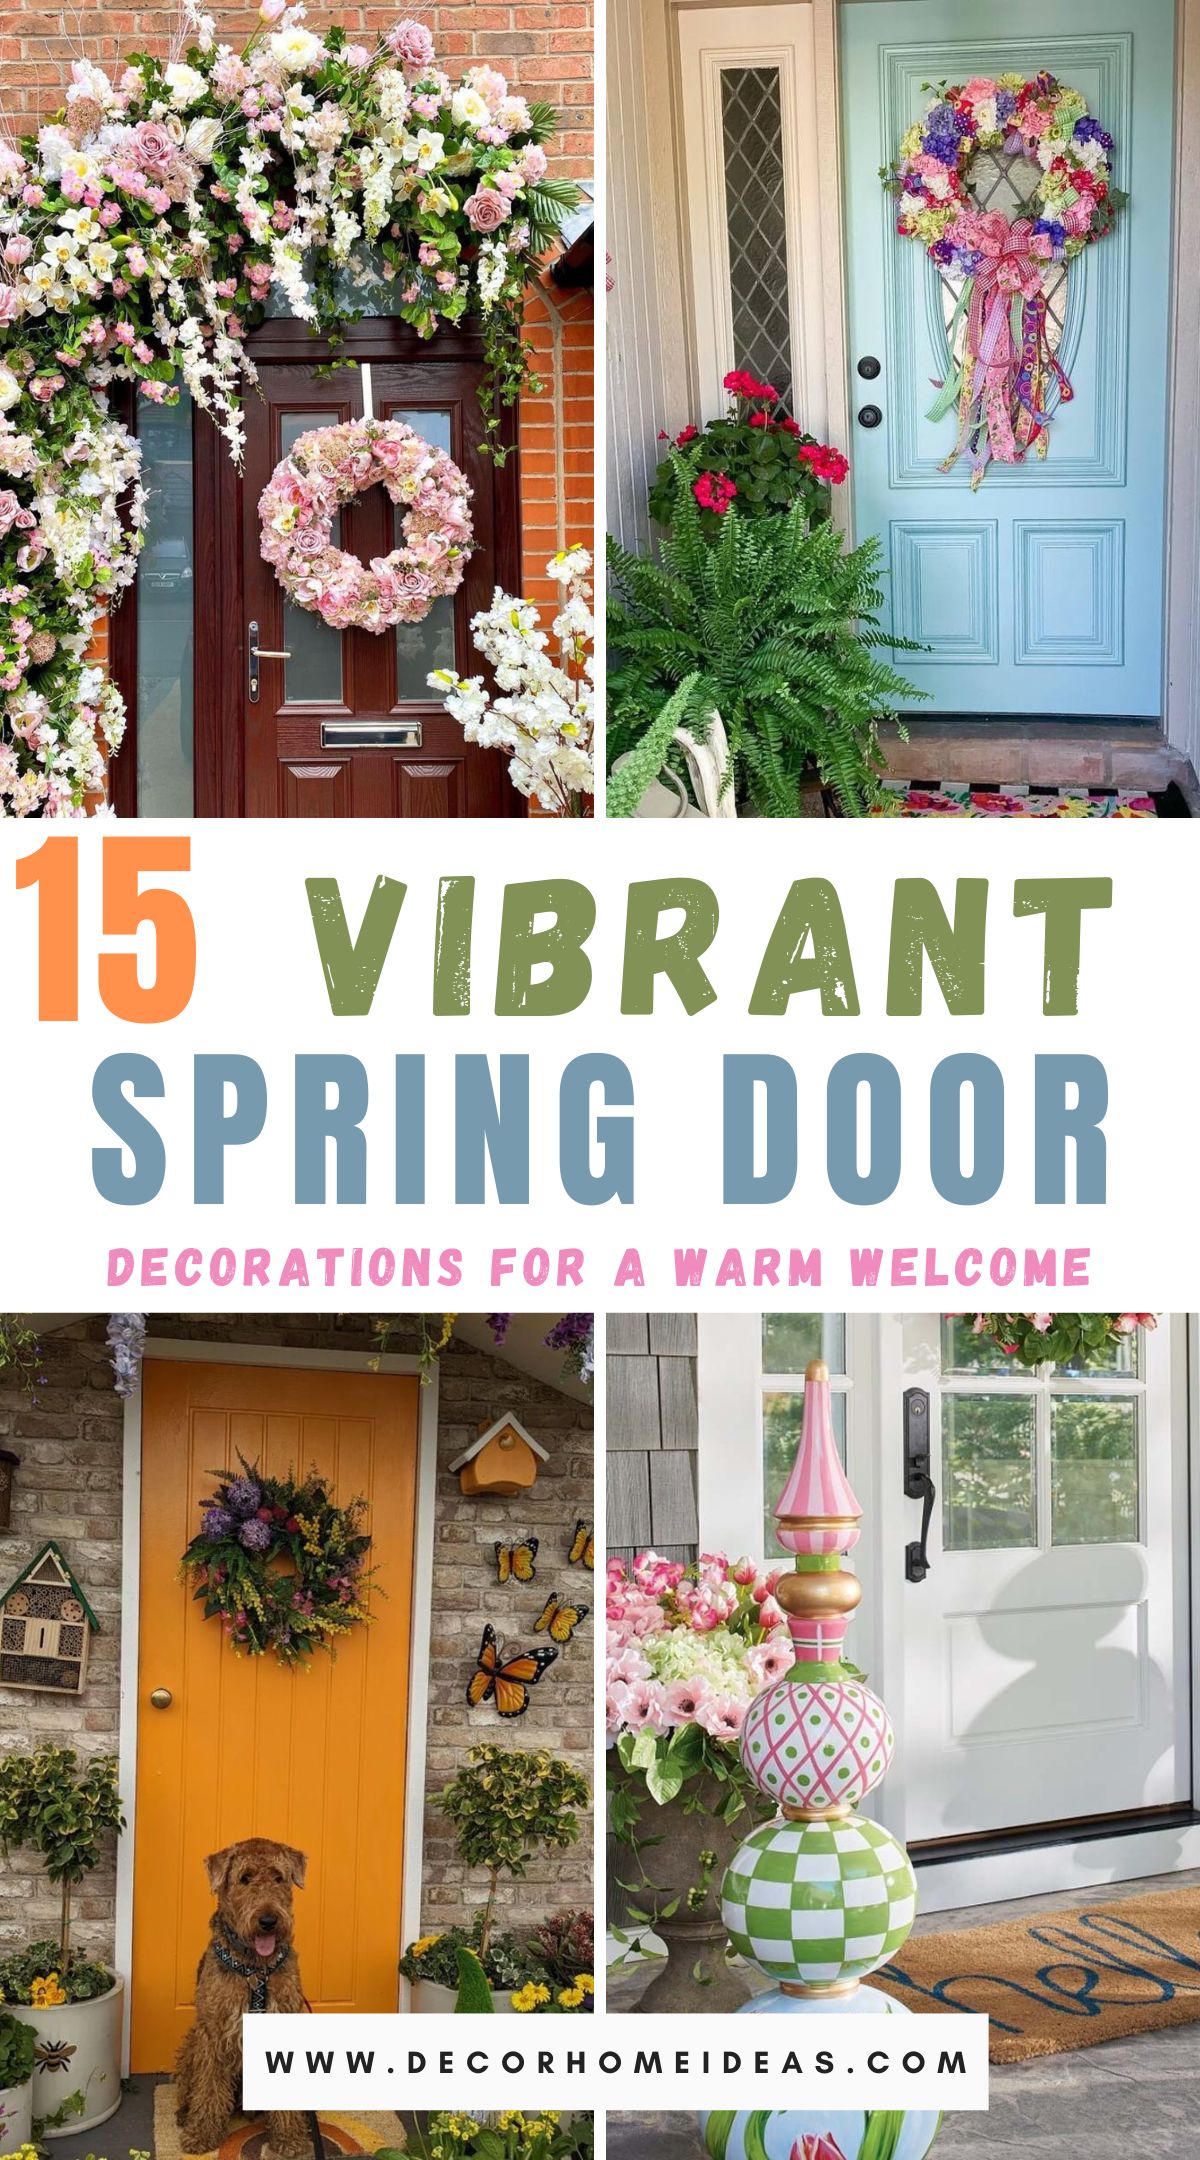 Welcome the season in style with these 15 spring door decorations. From vibrant wreaths to charming signs, explore creative and festive ideas to add a touch of springtime beauty to your entryway and greet guests with warmth and cheer.